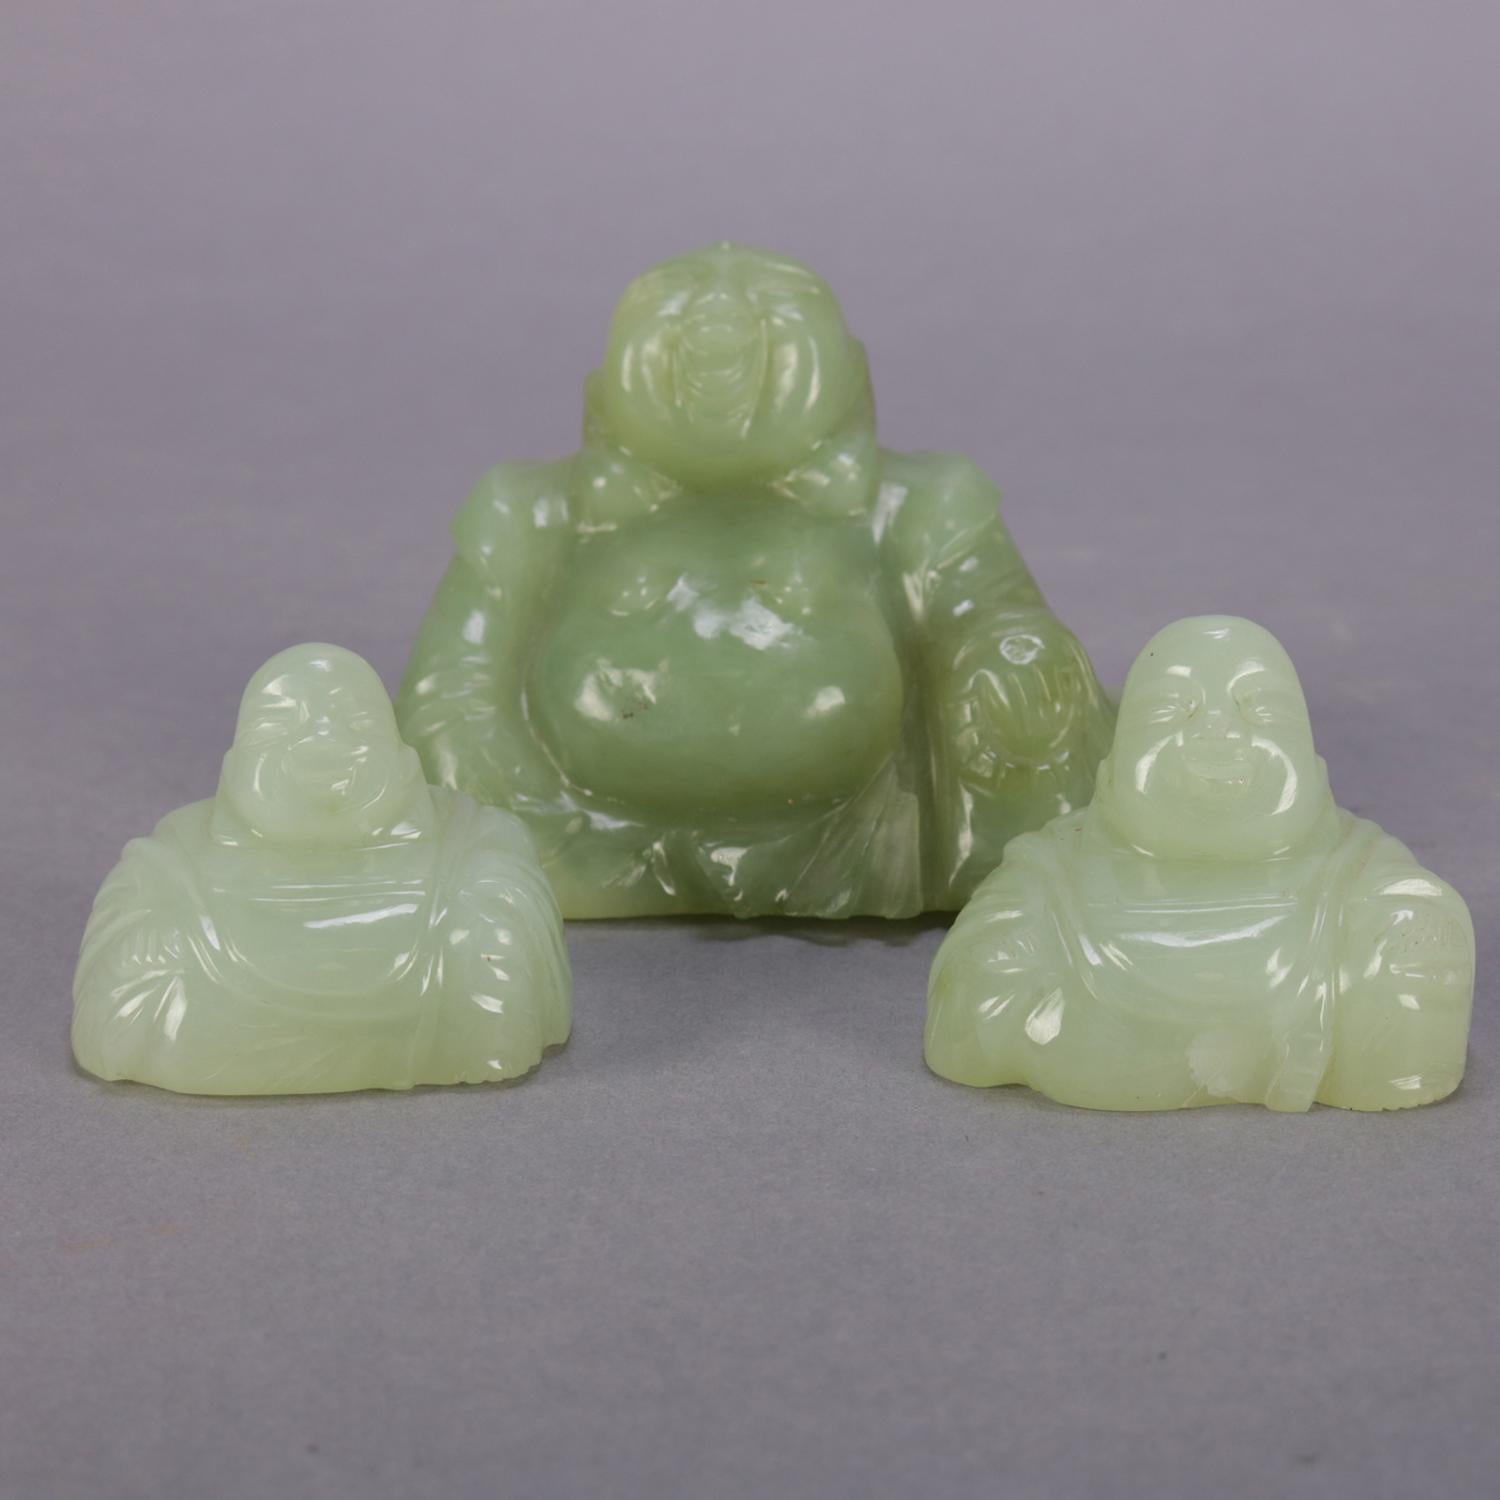 Set of three Chinese carved jade figural sculptures feature seated and laughing buddha, 20th century

Measures: larger 2.75